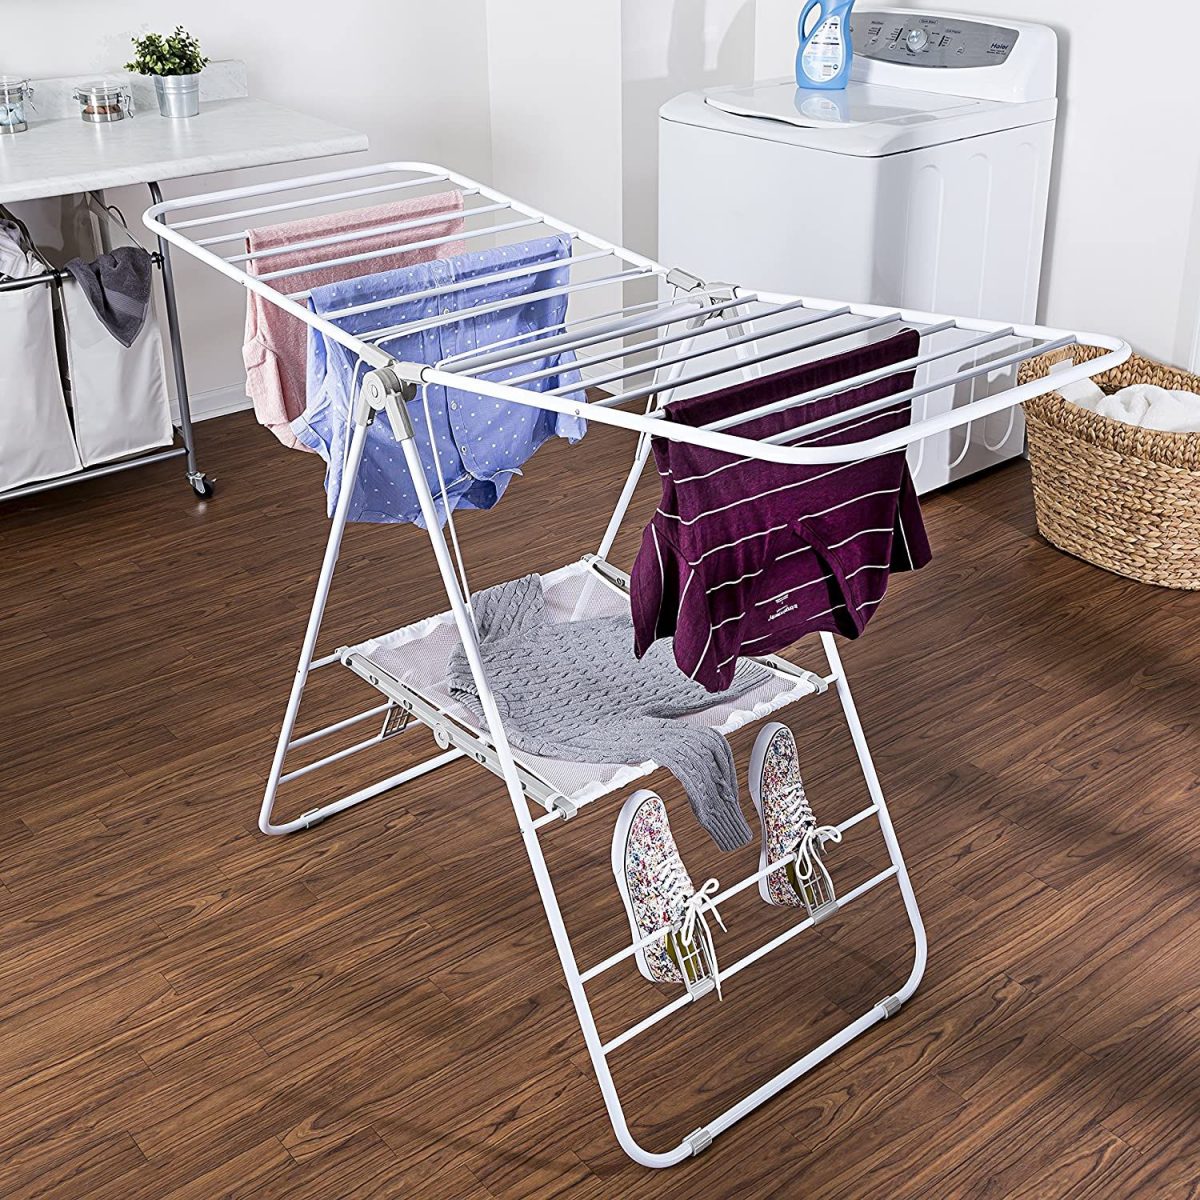 Should You Use Fold-Up Portable Clothes Dryer